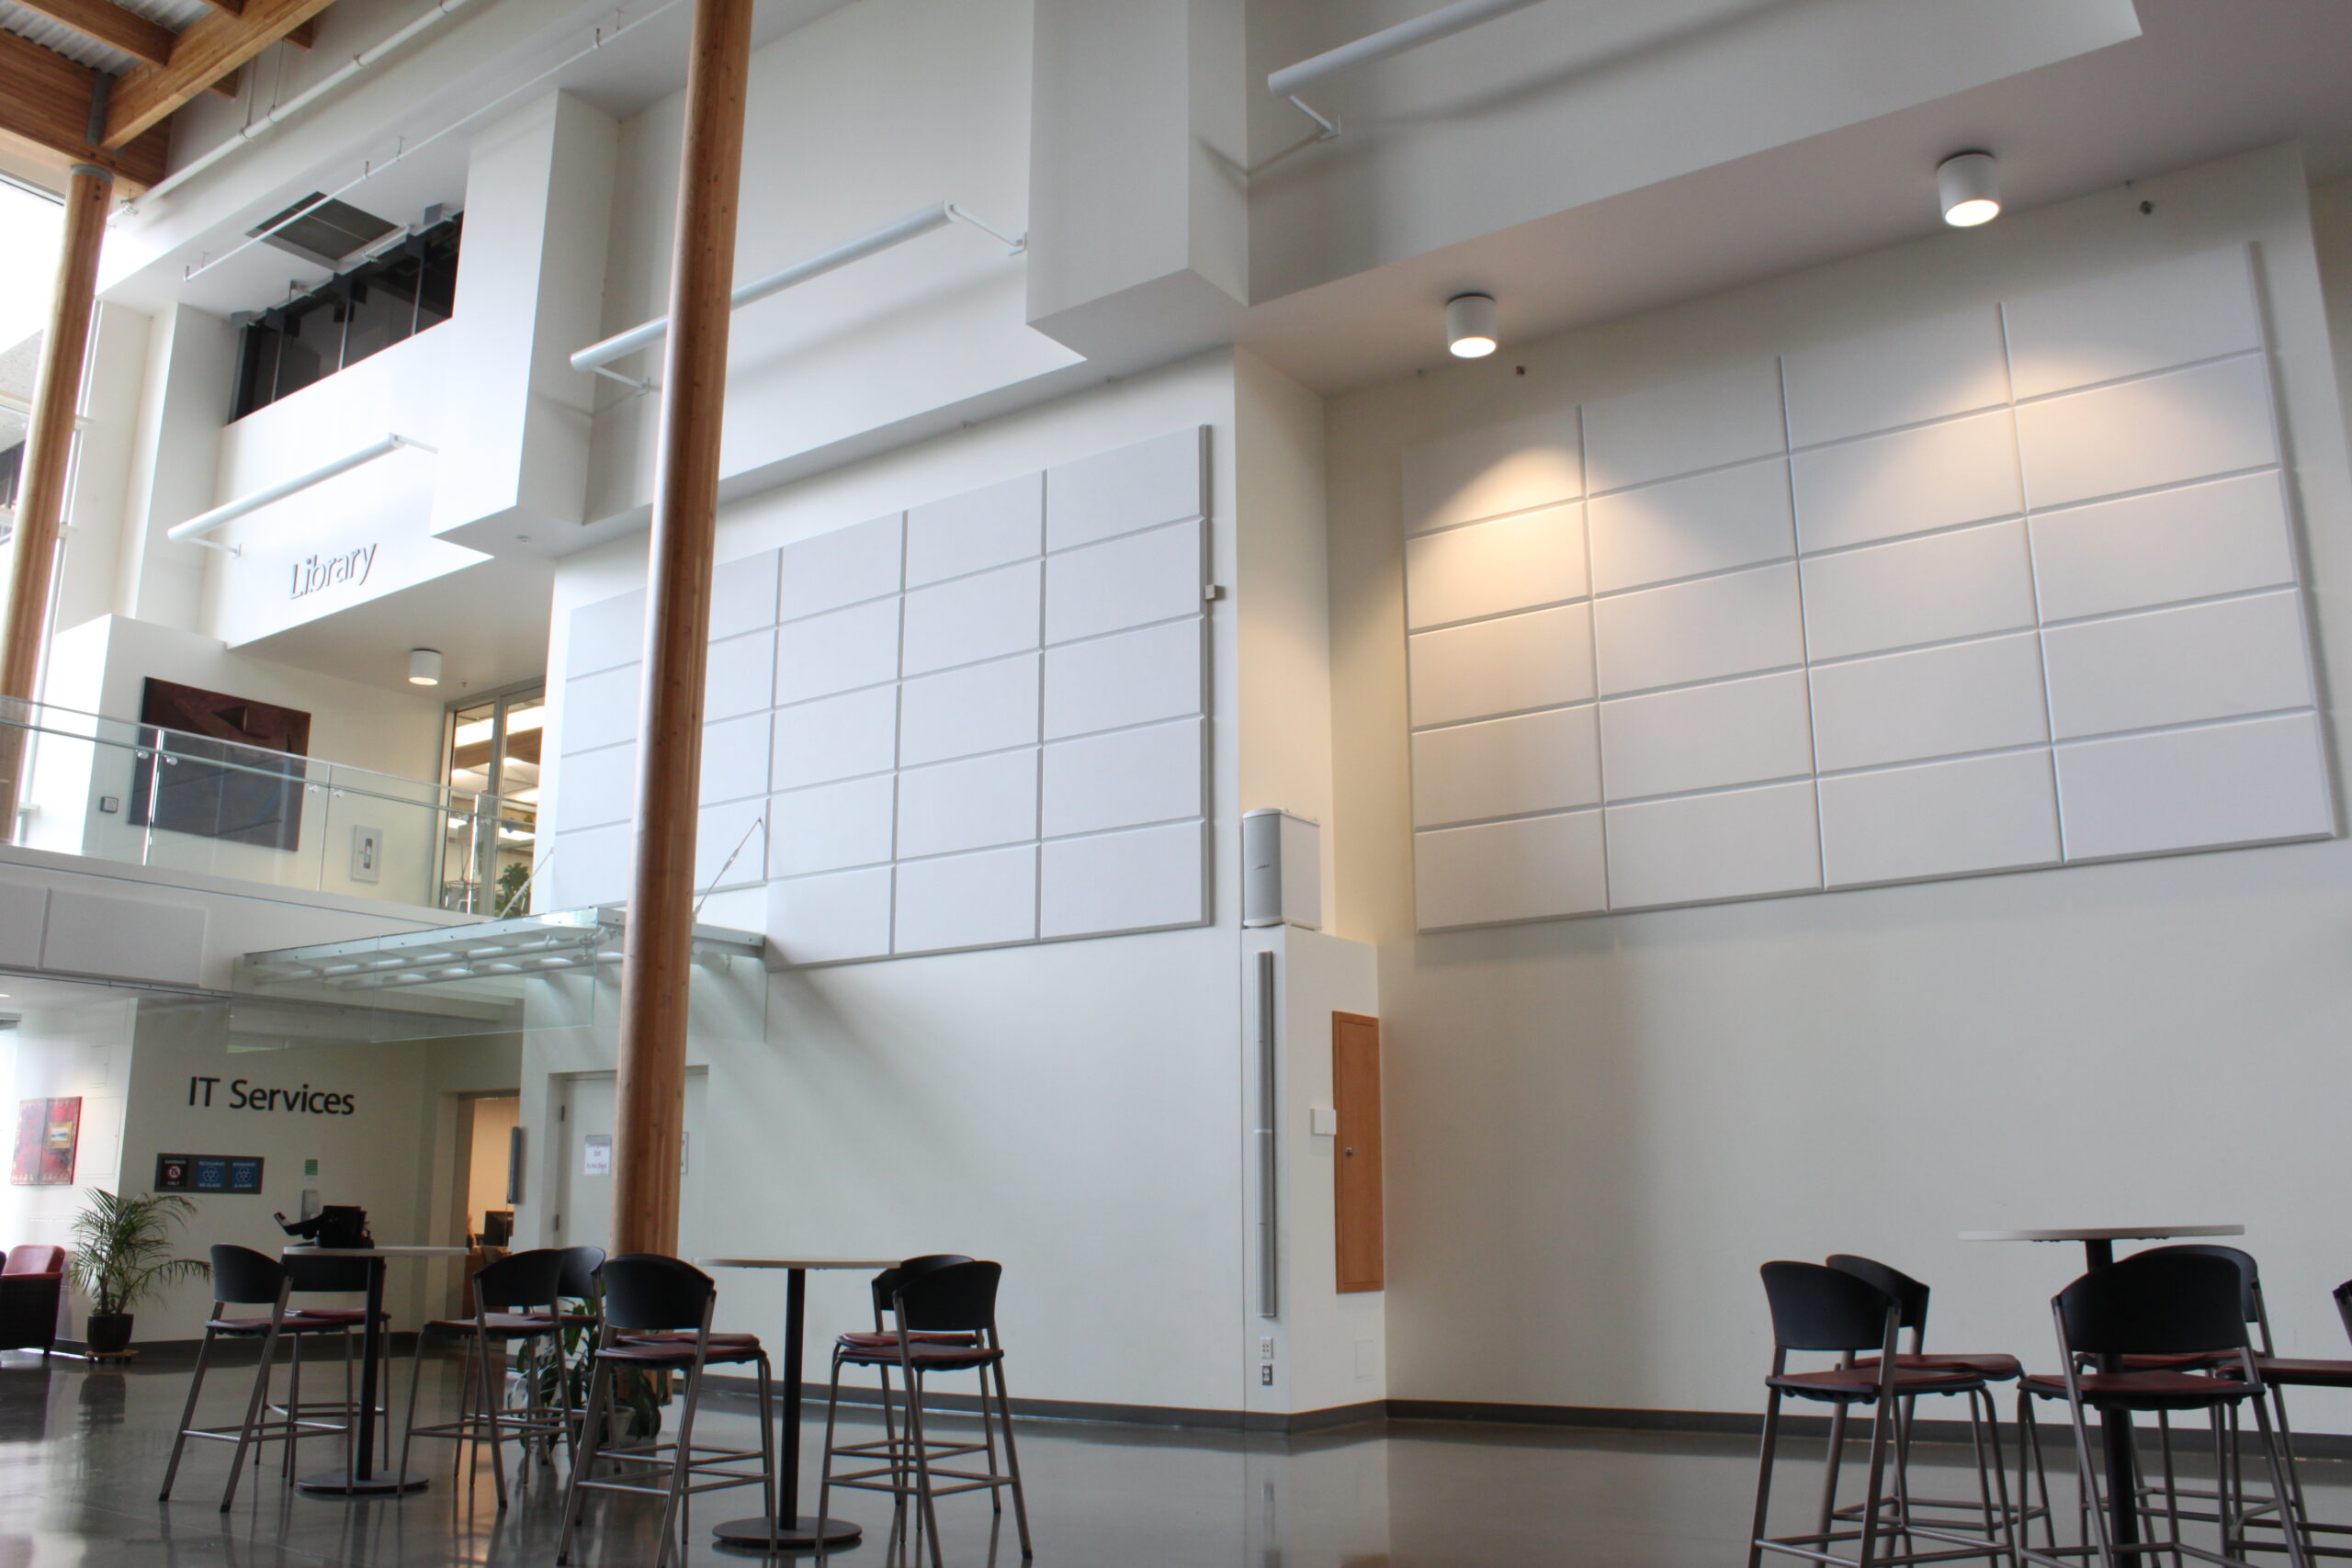 Inside college building with white walls and white acoustic wall panels